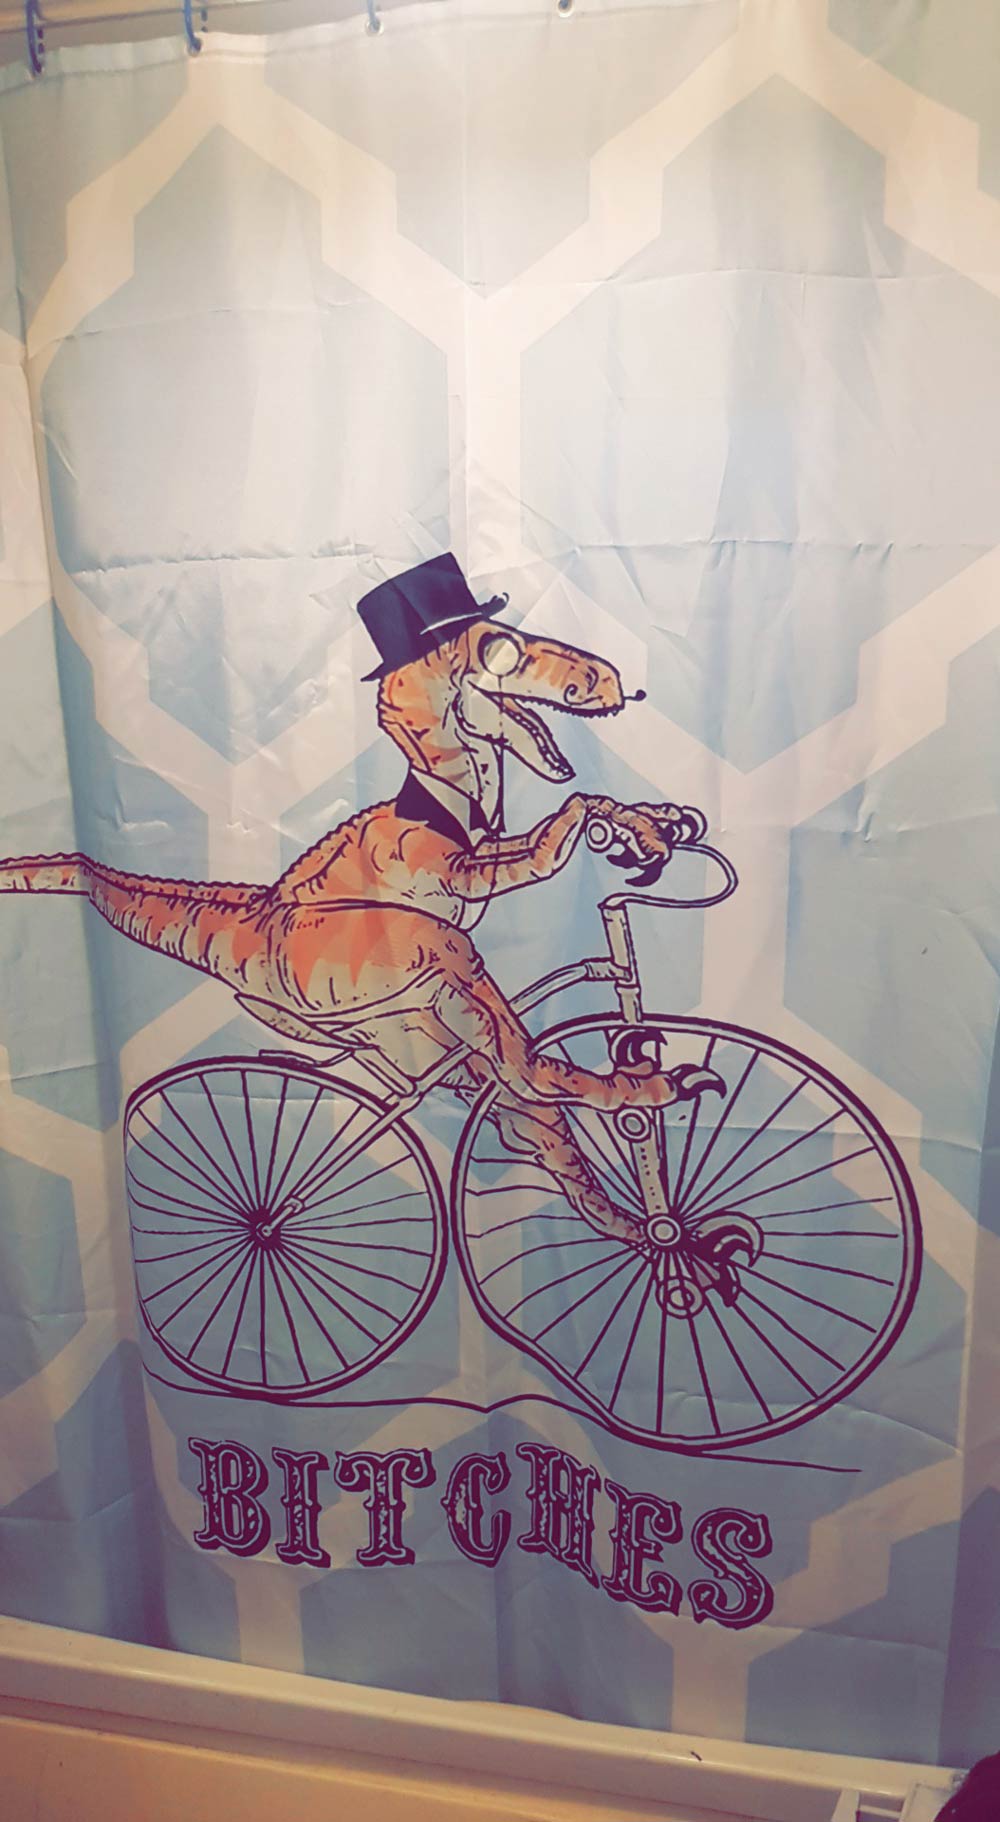 Told my husband to buy a new Shower Curtain. He did not disappoint